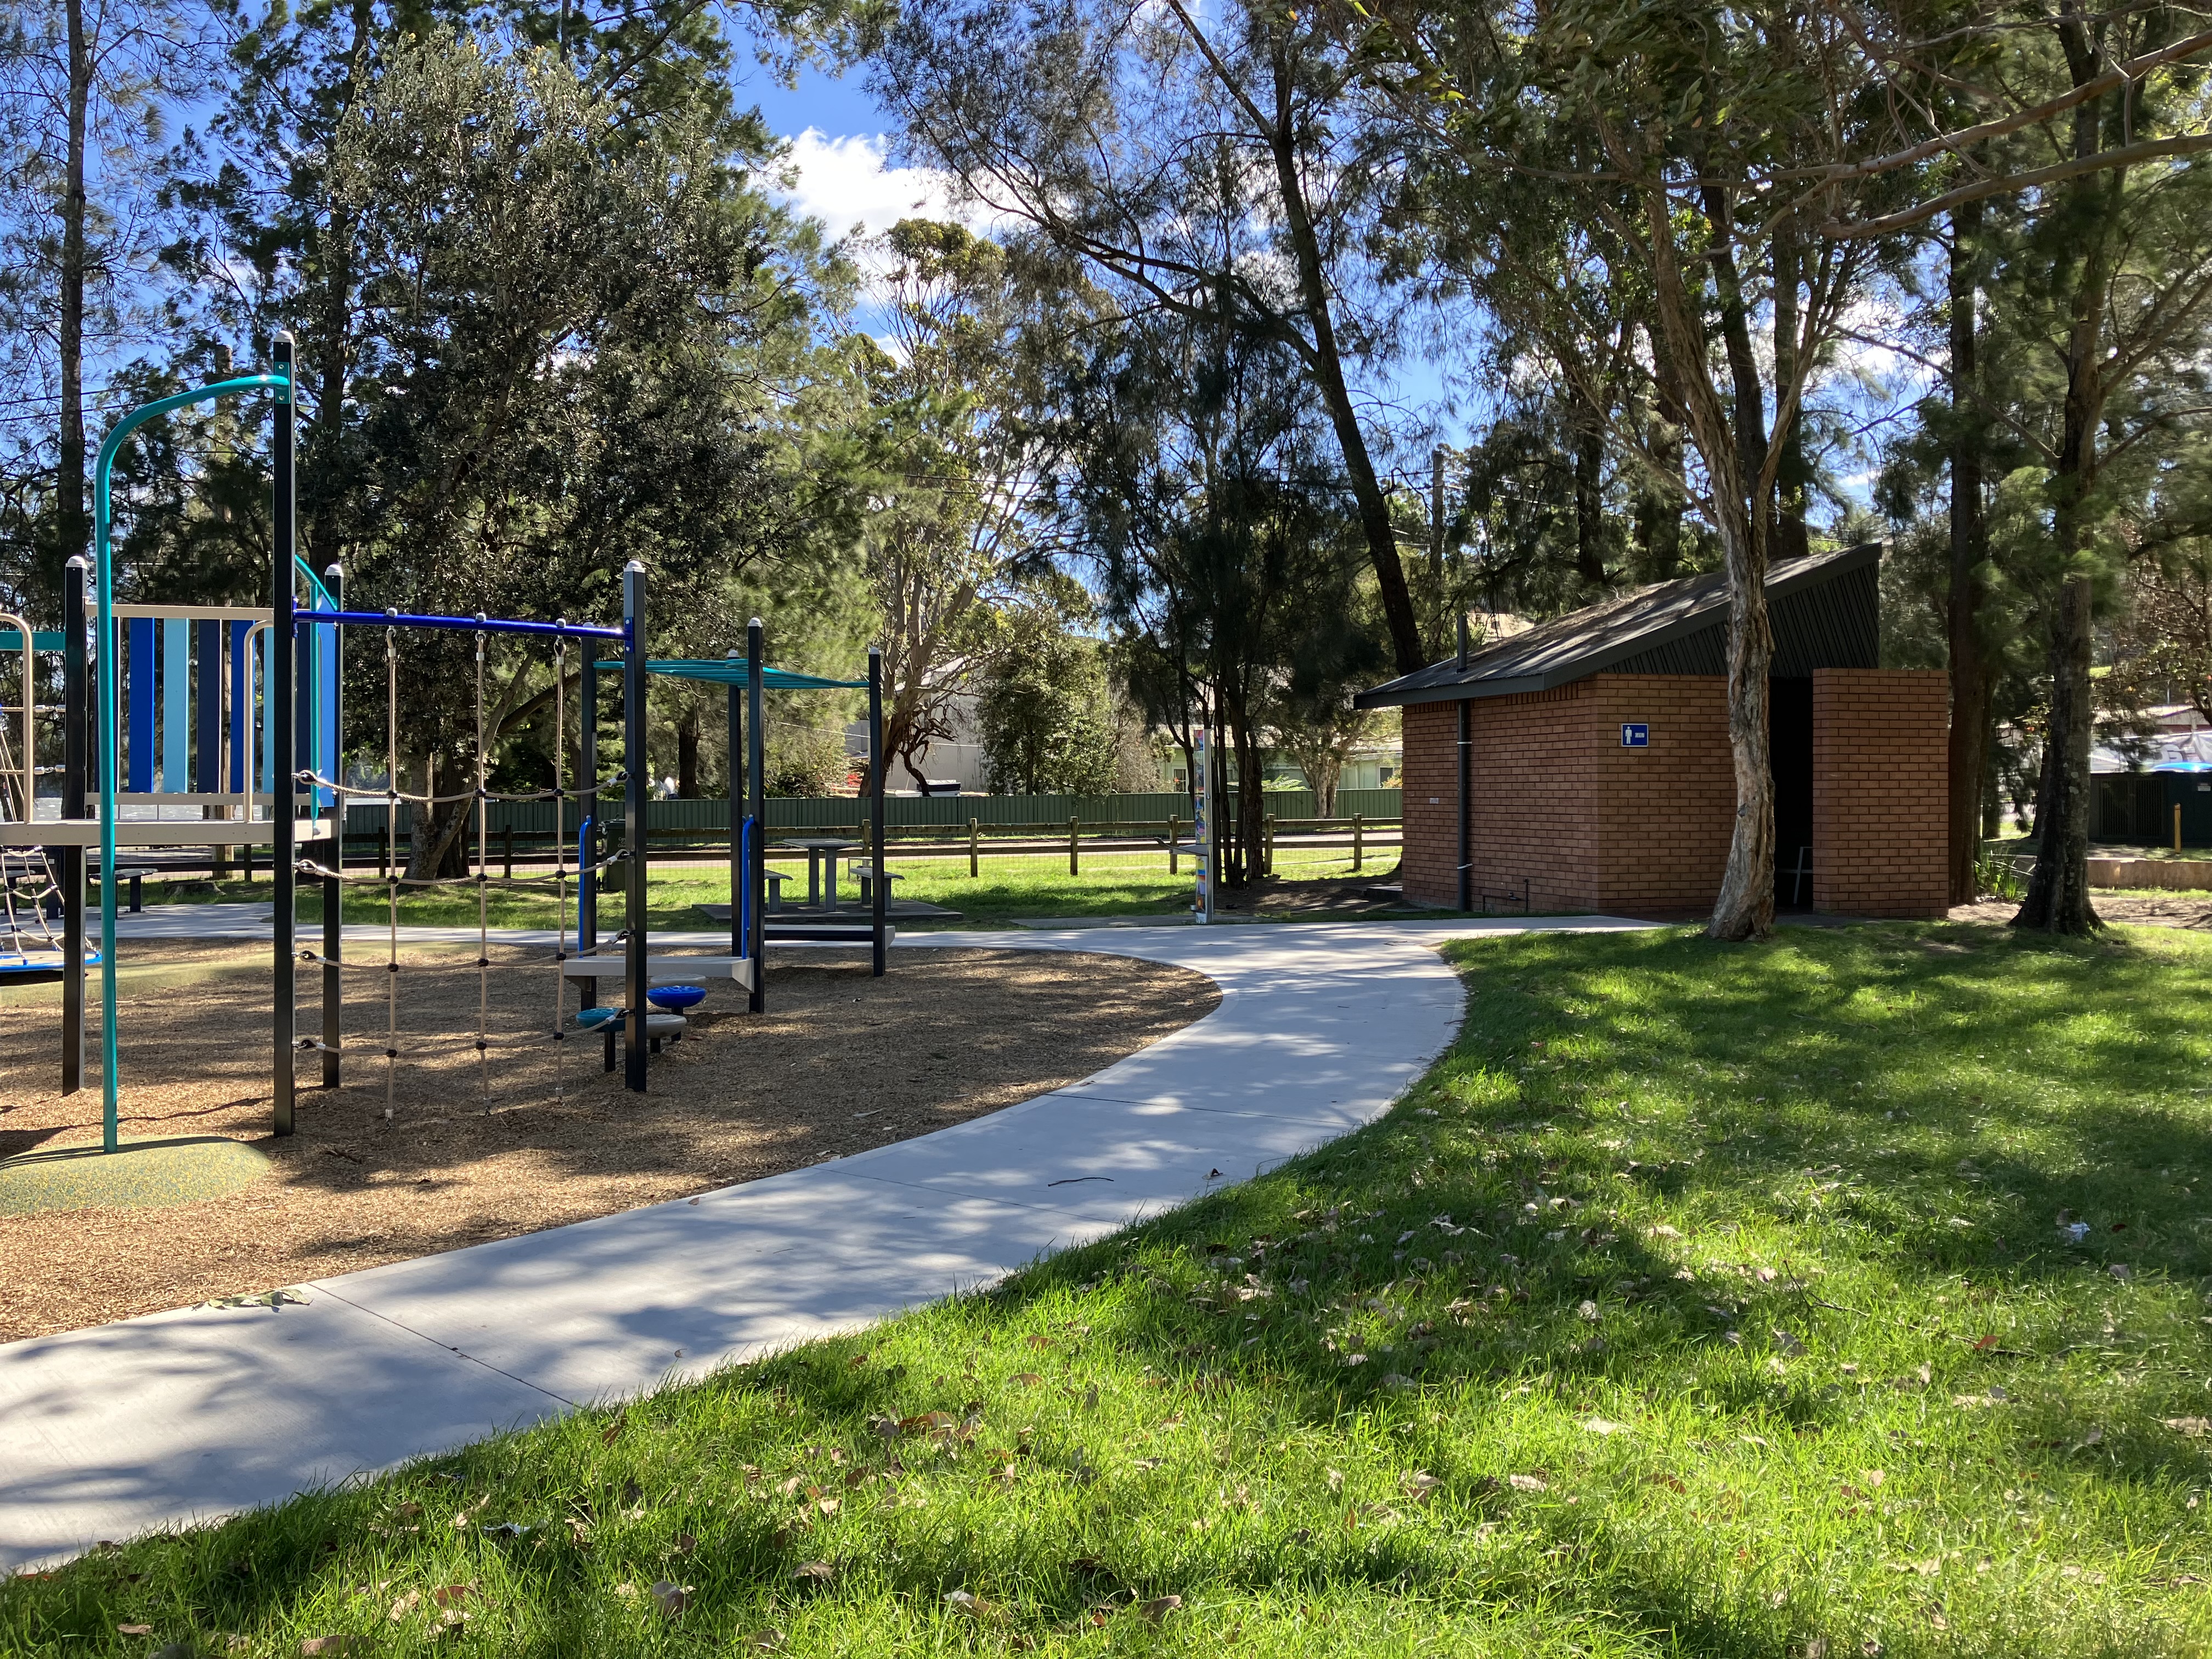 pathway with public toilets and grass and playground